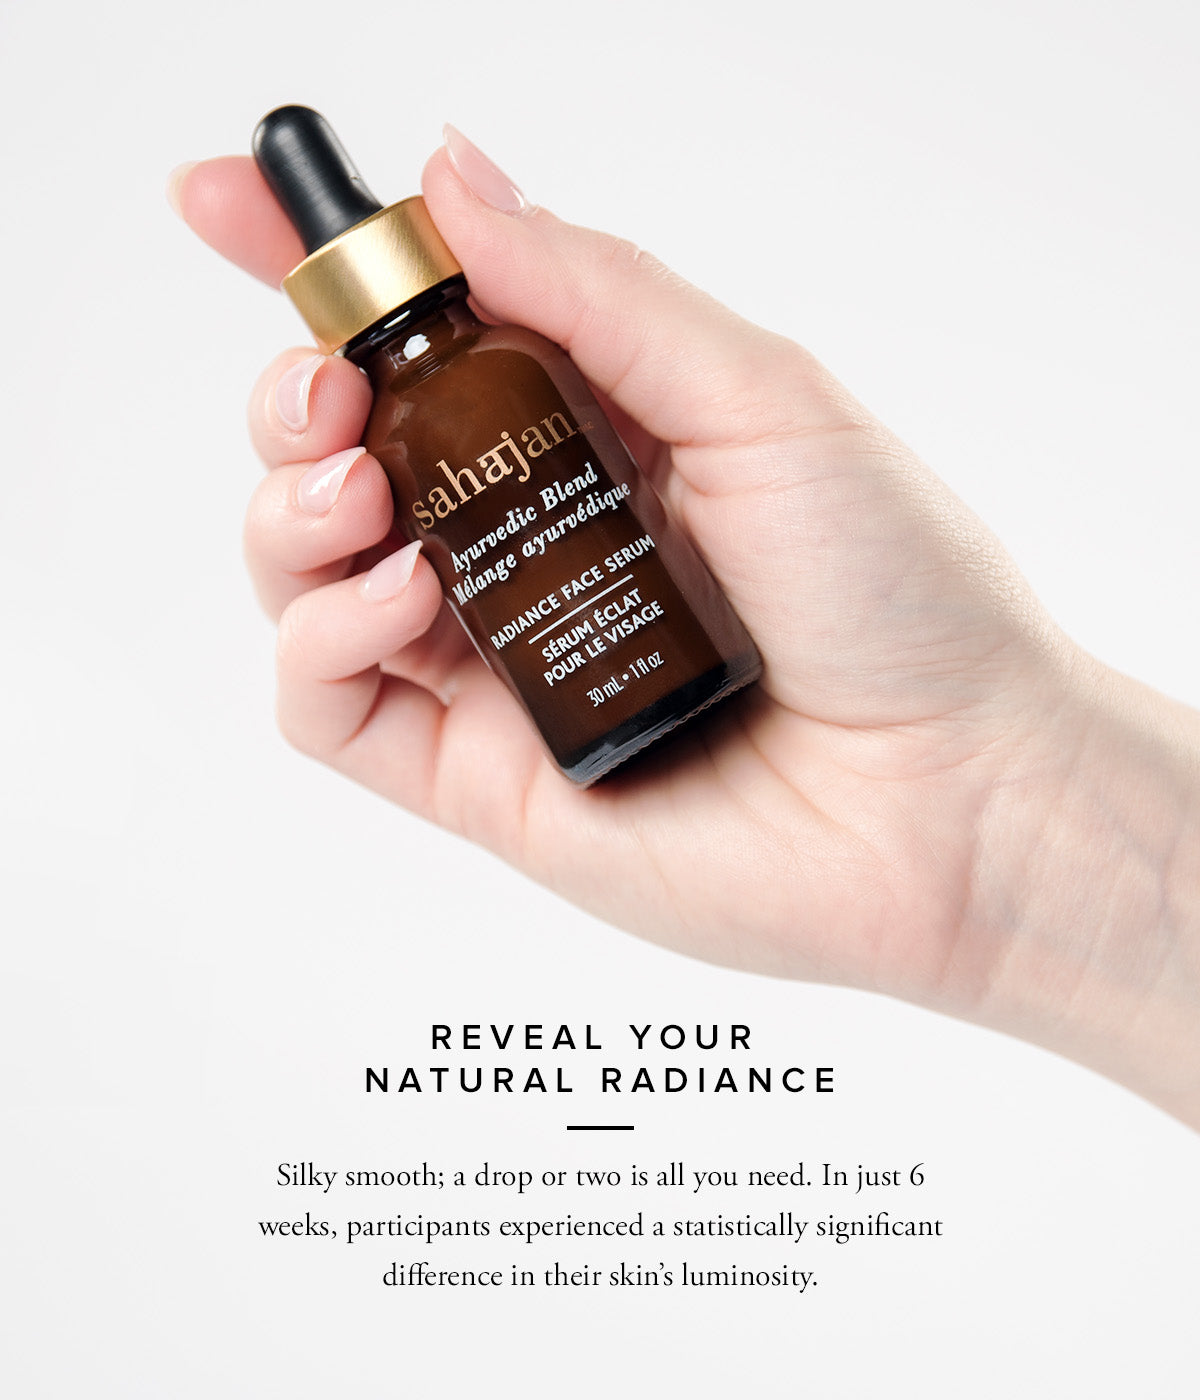 Reveal your natural radiance  Silky smooth; a drop or two is all you need for that dewy glow. In just 6 weeks, participants experienced a statistically significant difference in their skin’s luminosity.